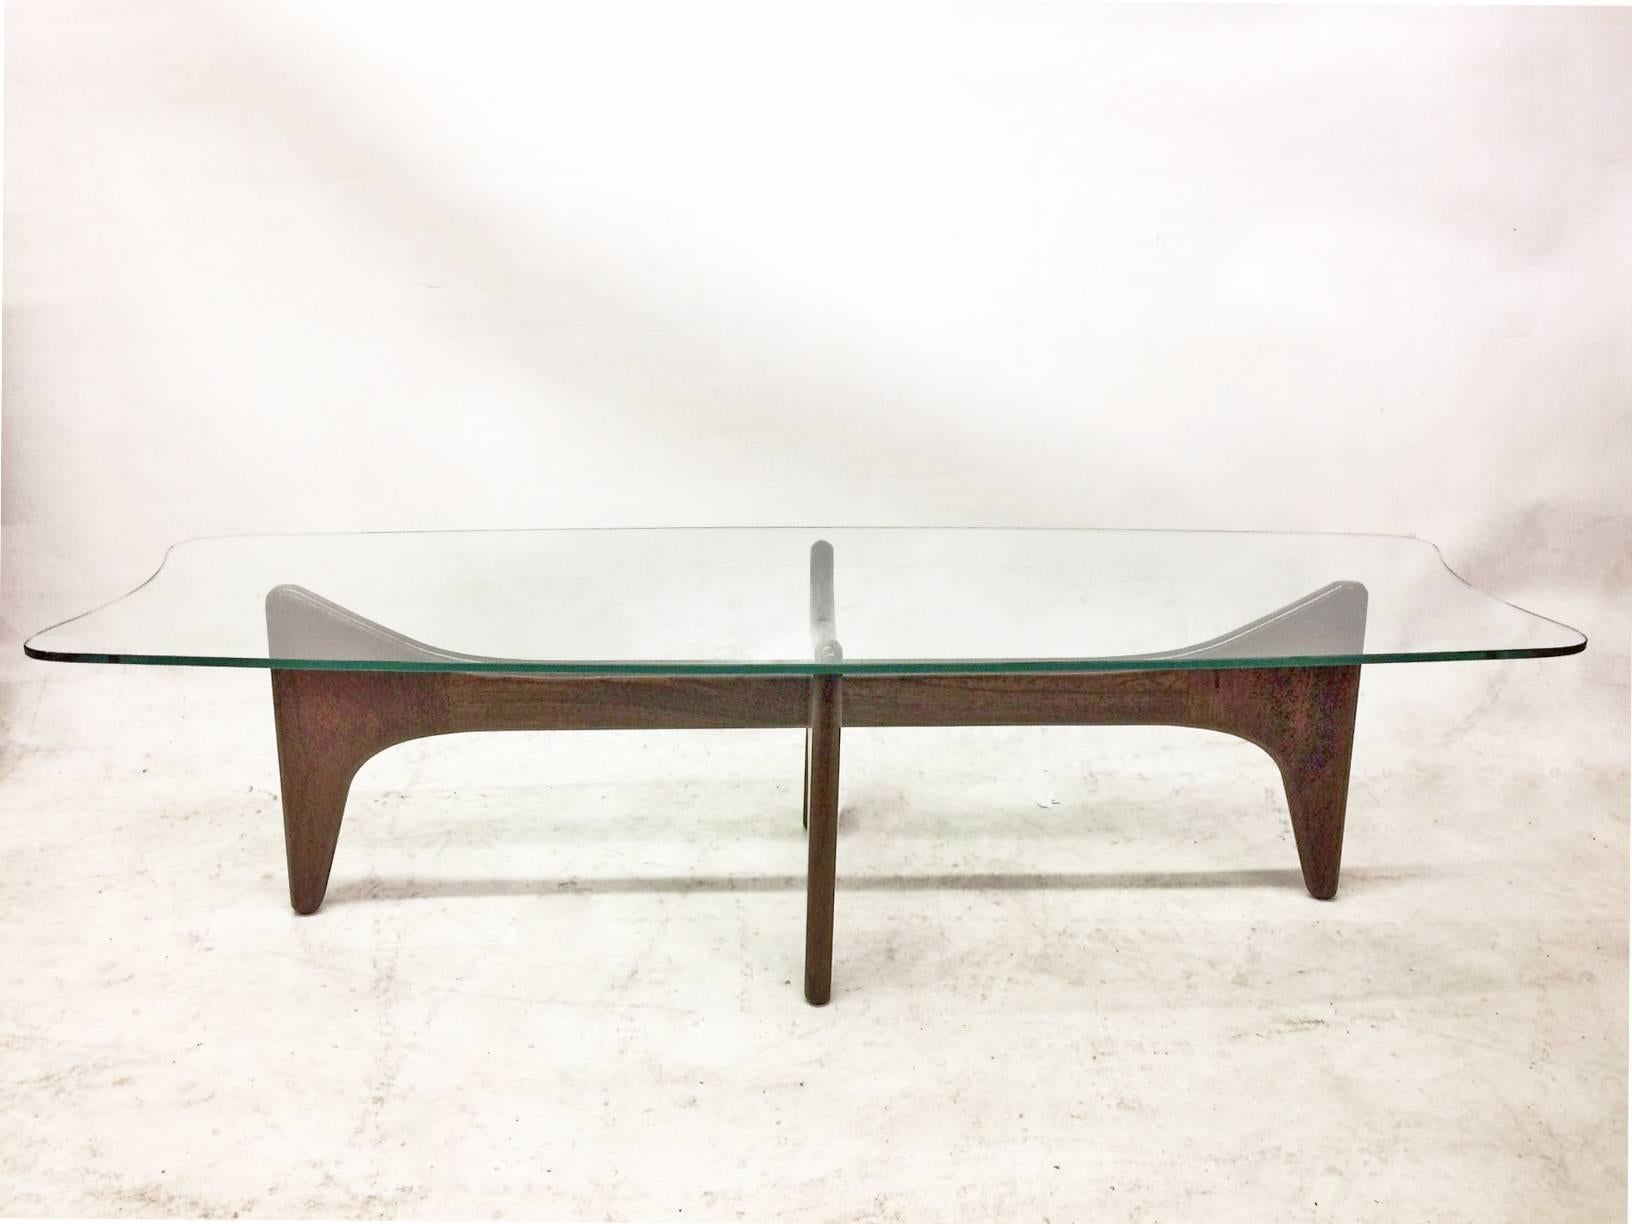 This cocktail table by Adrian Pearsall was manufactured by Craft Associates. The organically shaped walnut based is topped in glass.